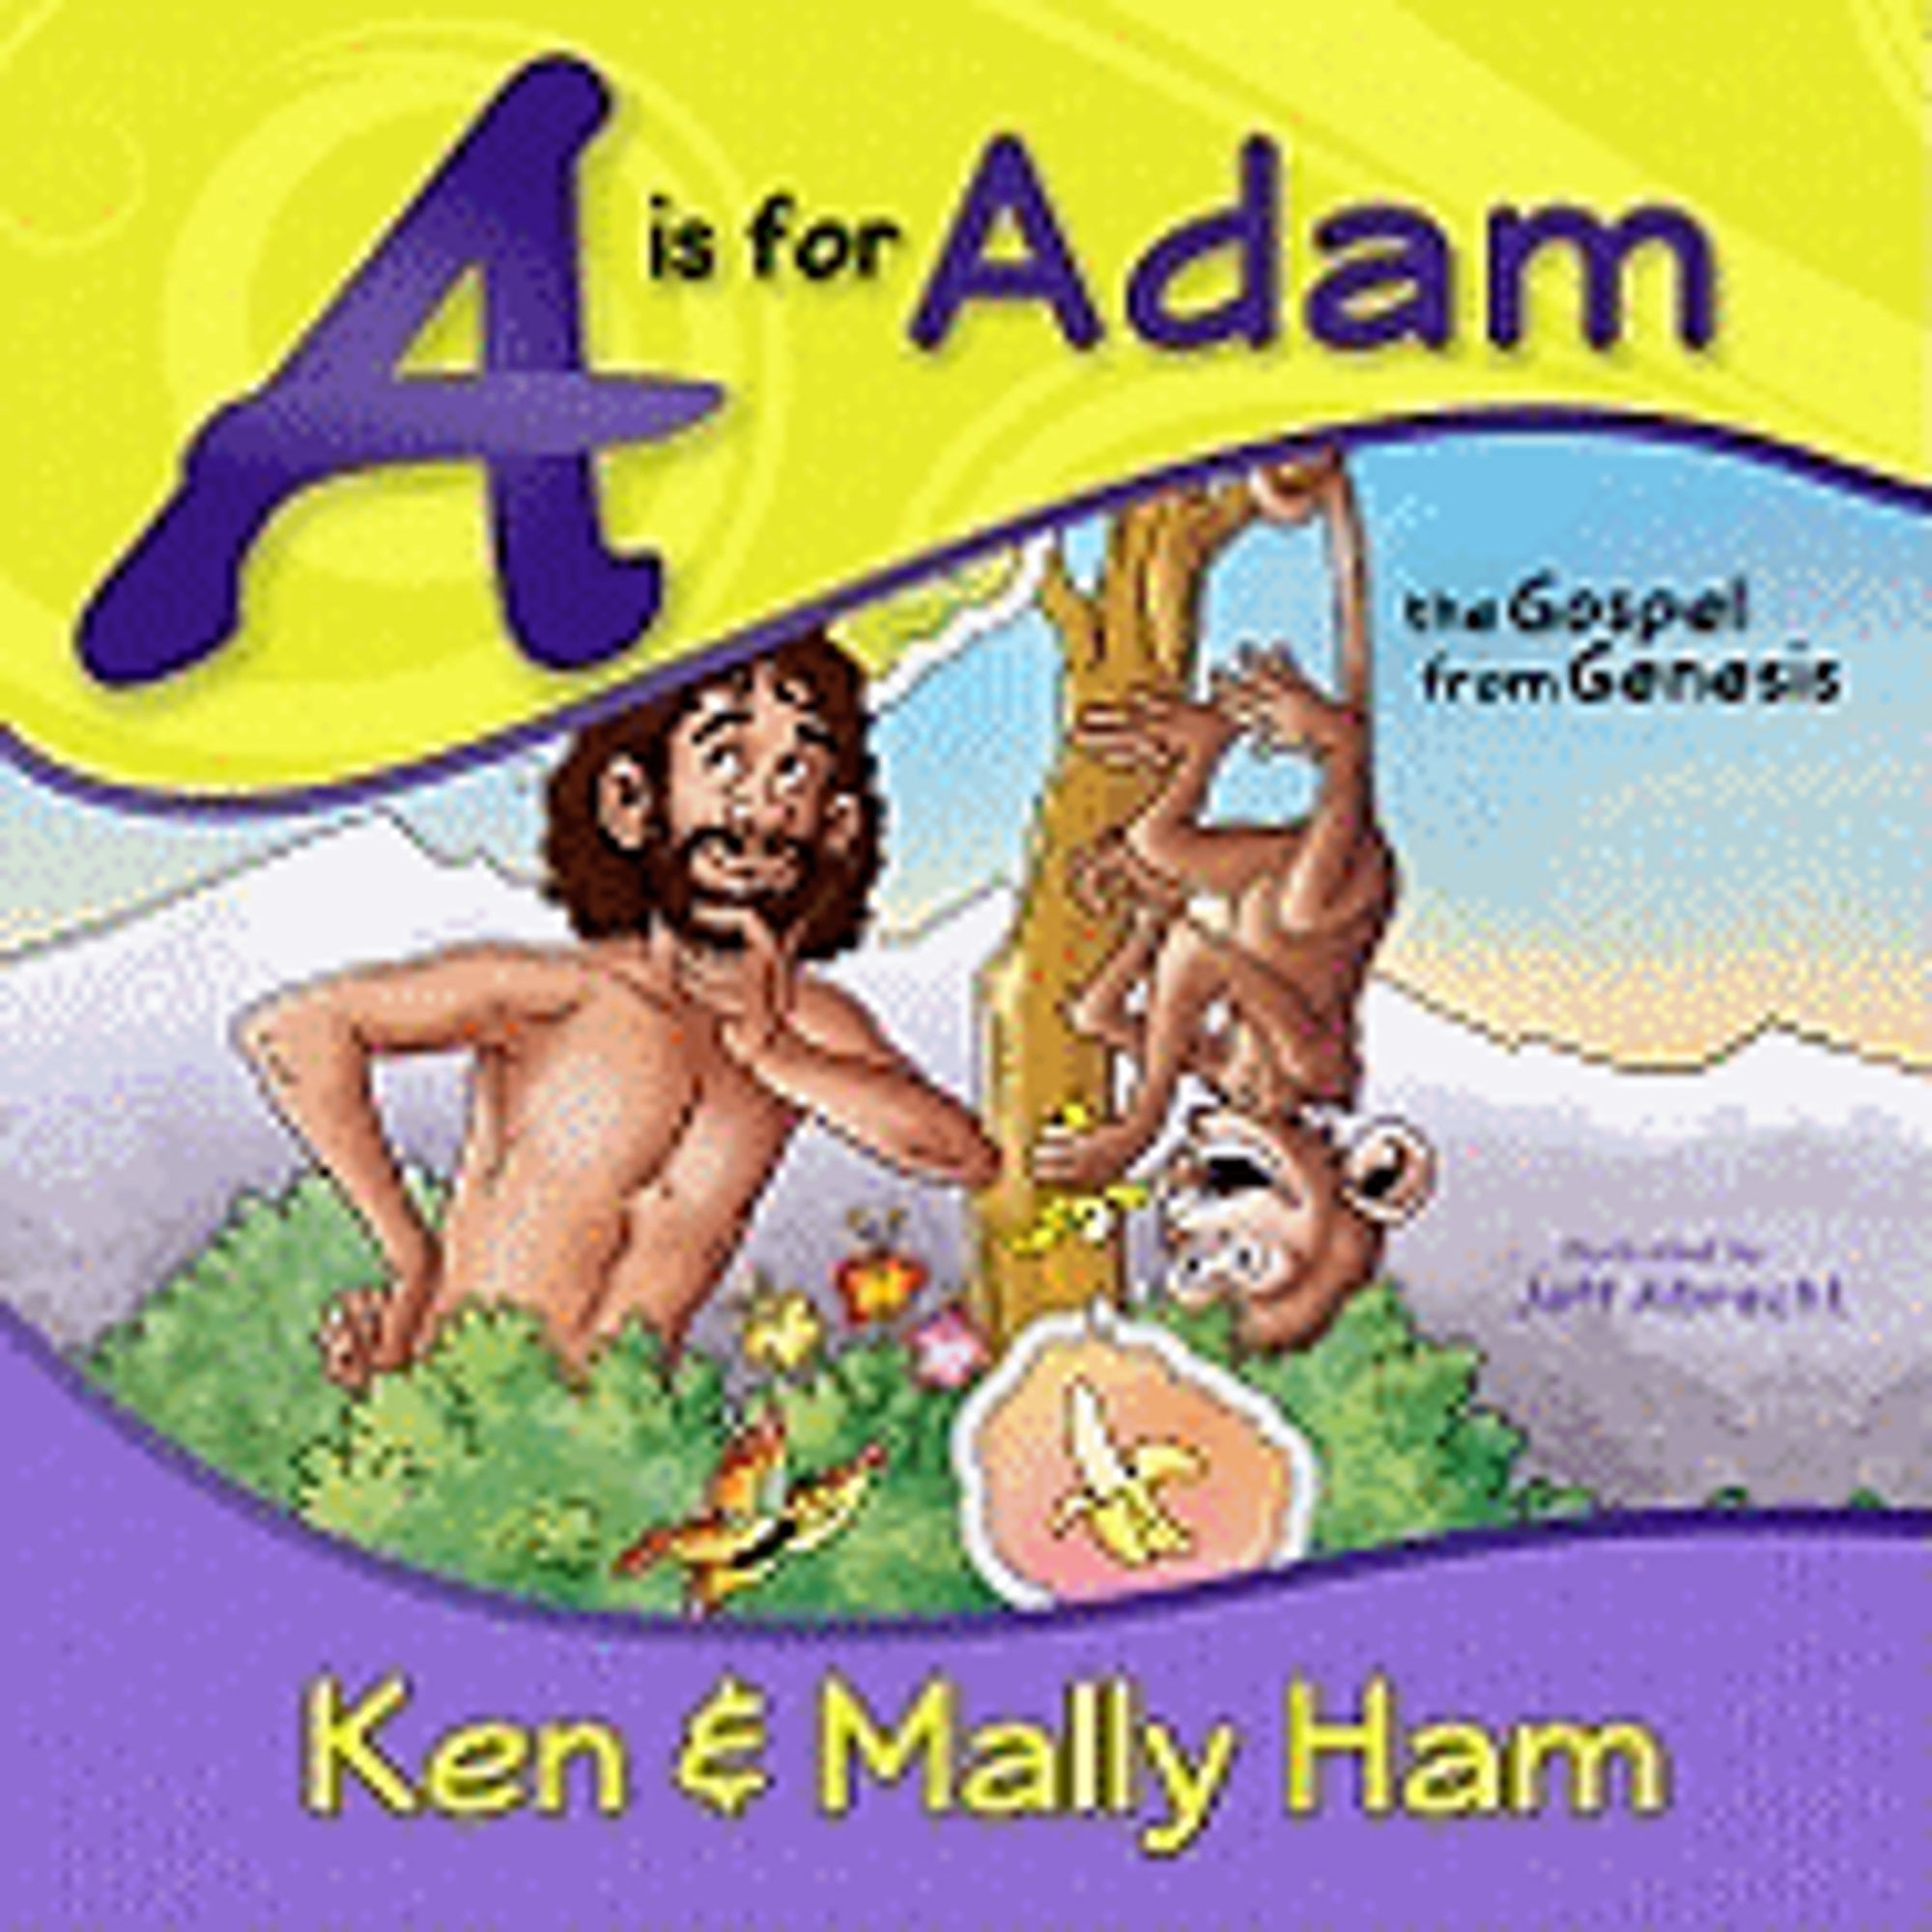 Pre-Owned A Is for Adam: The Gospel from Genesis Paperback Ken Ham, Mally Ham